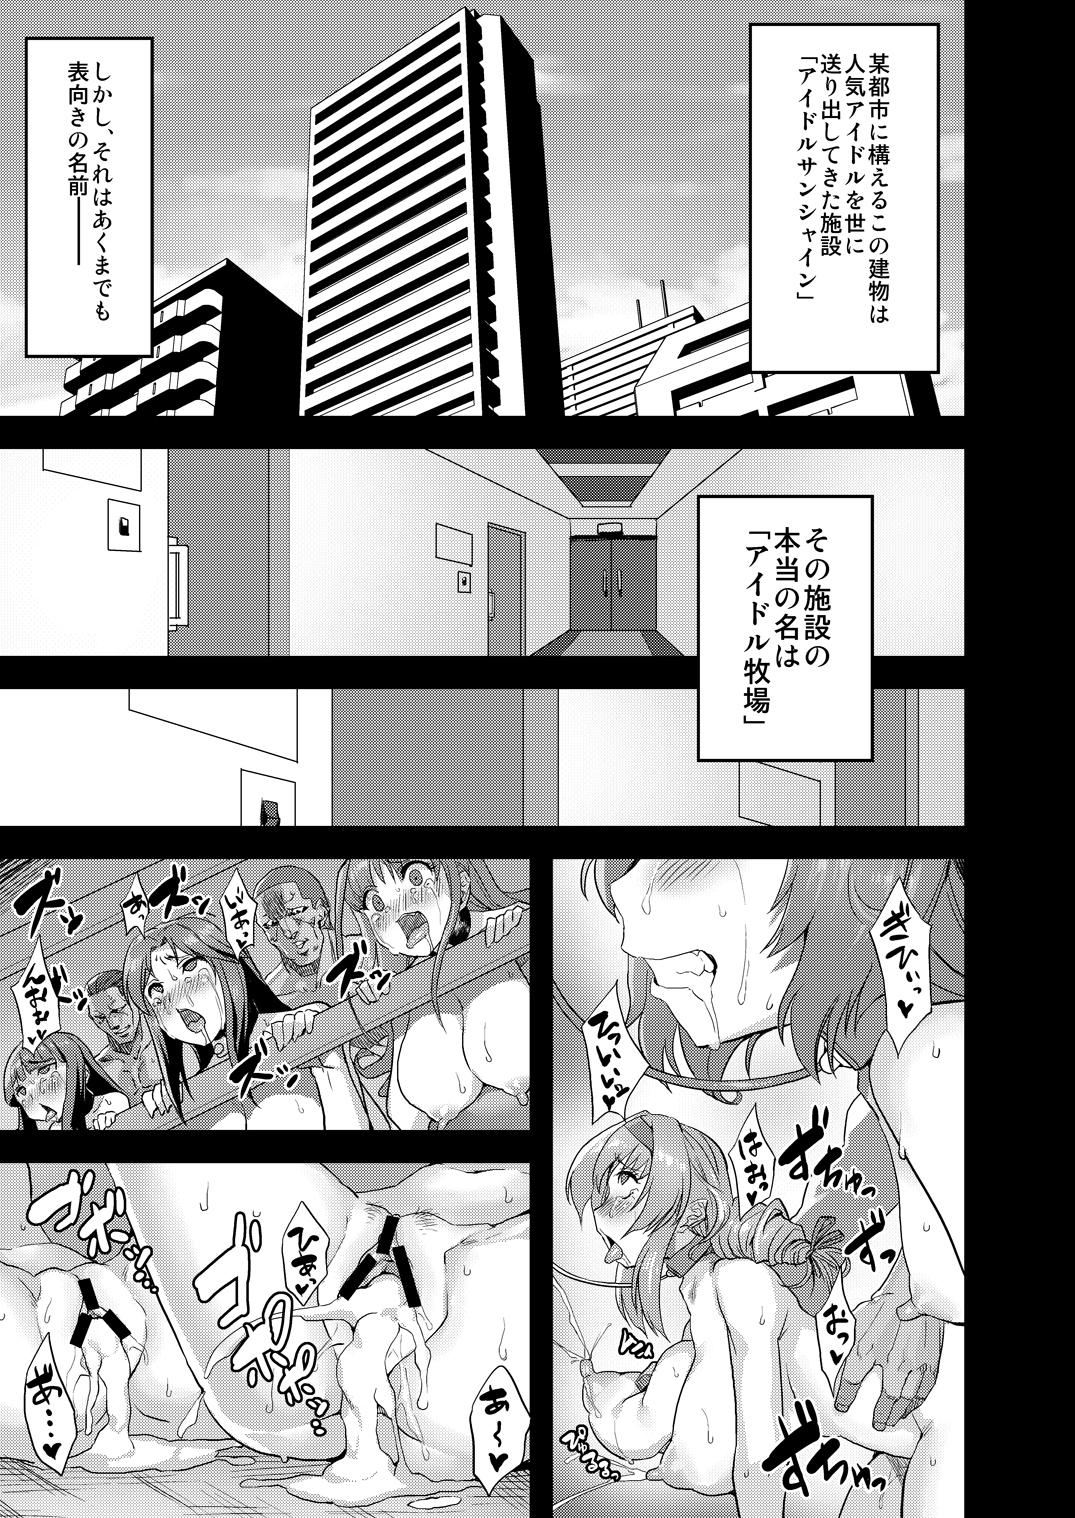 Missionary Hentai Idol Bokujou NEXT STAGE - The idolmaster 18 Year Old - Page 2